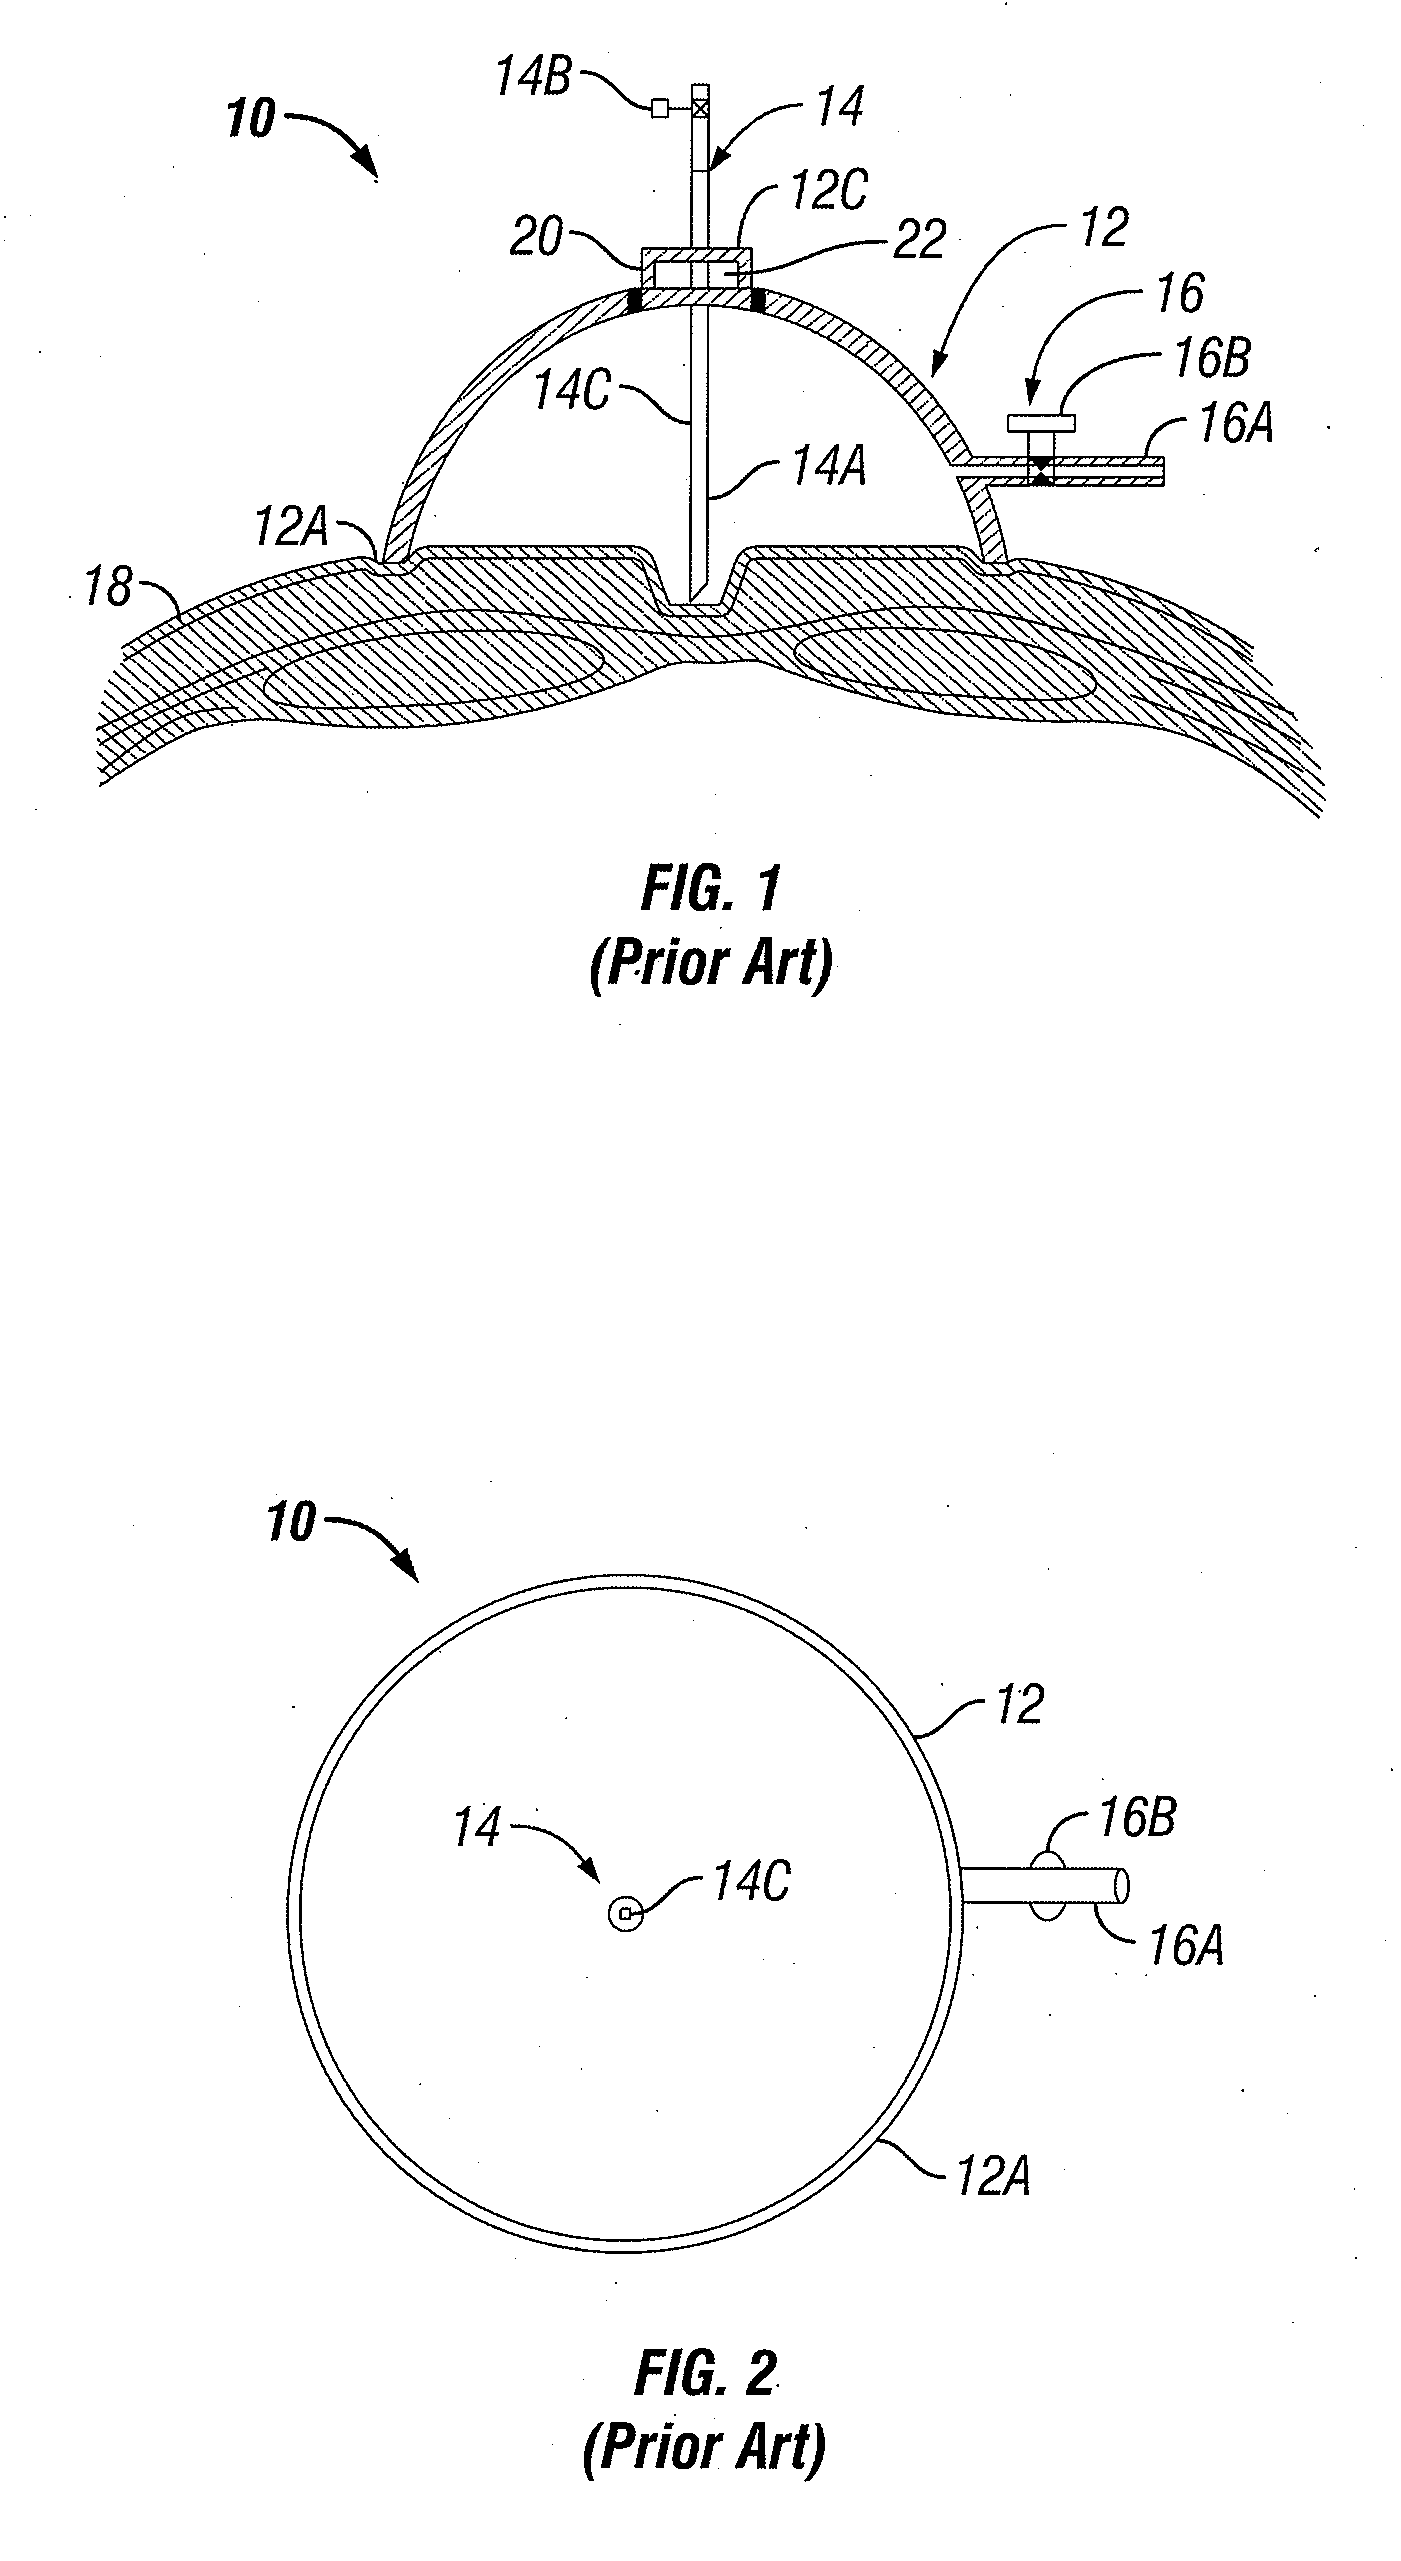 Method and Apparatus for Assisting in the Introduction of Surgical Implements into a Body